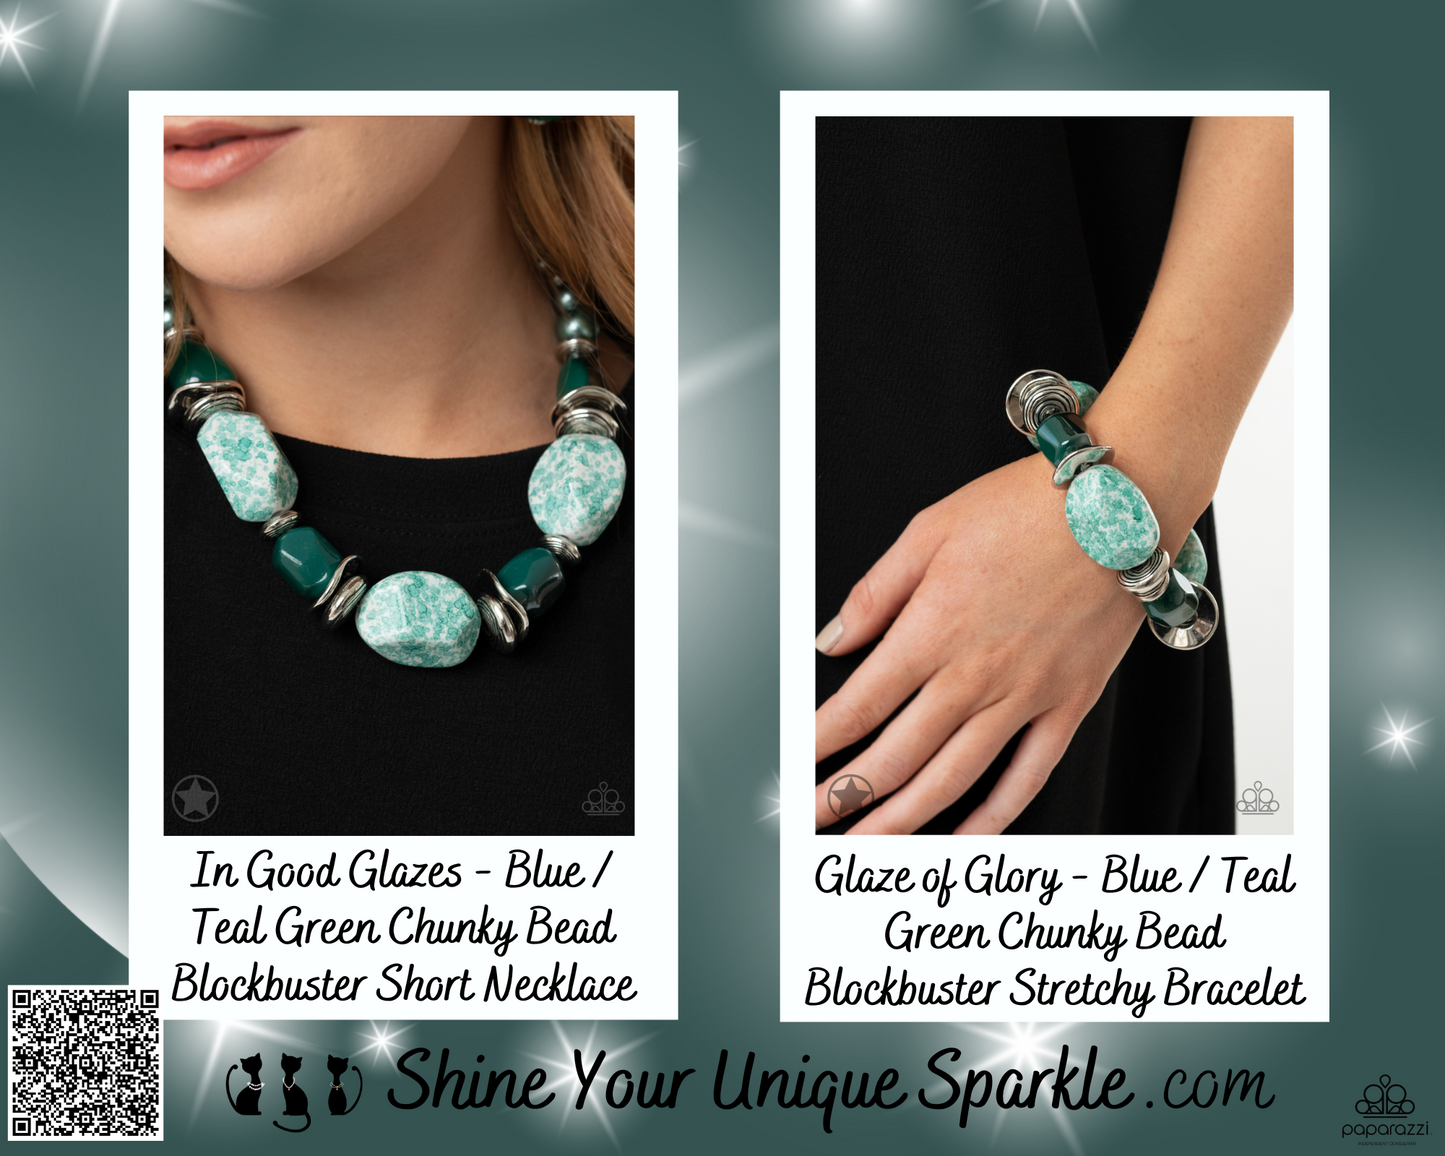 PERFECT MATCH / SET: In Good Glazes - Blue / Teal Green Chunky Bead Blockbuster Short Necklace AND Glaze of Glory - Blue / Teal Grean Chunky Bead Blockbuster Stretchy Bracelet